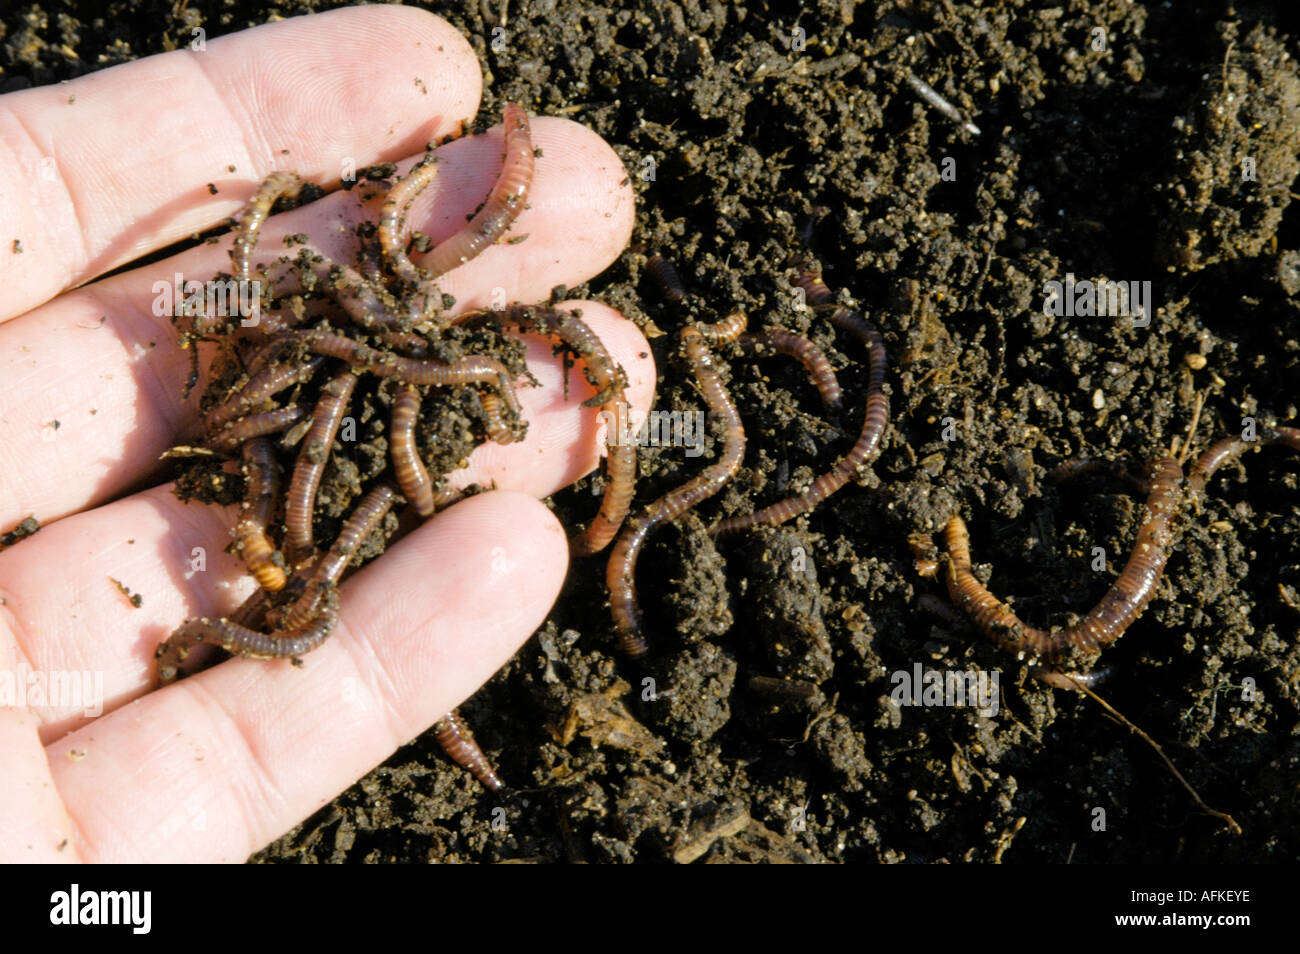 Tiger Worms In Garden Compost On Hand Stock Photo 7982653 Alamy